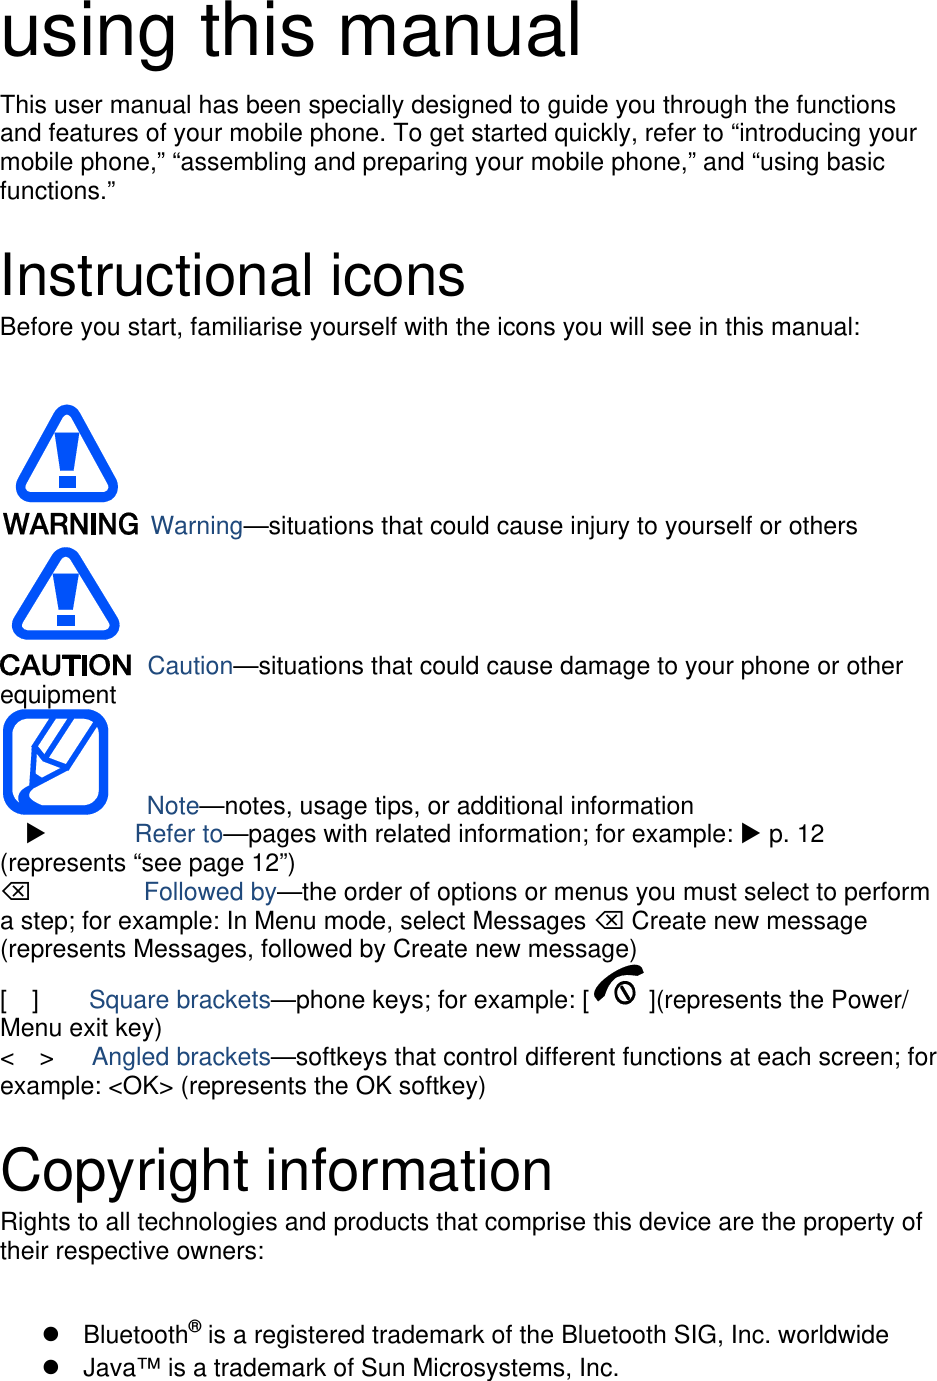 using this manual This user manual has been specially designed to guide you through the functions and features of your mobile phone. To get started quickly, refer to “introducing your mobile phone,” “assembling and preparing your mobile phone,” and “using basic functions.”  Instructional icons Before you start, familiarise yourself with the icons you will see in this manual:     Warning—situations that could cause injury to yourself or others  Caution—situations that could cause damage to your phone or other equipment    Note—notes, usage tips, or additional information          Refer to—pages with related information; for example:  p. 12 (represents “see page 12”)      Followed by—the order of options or menus you must select to perform a step; for example: In Menu mode, select Messages  Create new message (represents Messages, followed by Create new message) [  ]    Square brackets—phone keys; for example: [ ](represents the Power/ Menu exit key) &lt;  &gt;   Angled brackets—softkeys that control different functions at each screen; for example: &lt;OK&gt; (represents the OK softkey)  Copyright information Rights to all technologies and products that comprise this device are the property of their respective owners:   Bluetooth® is a registered trademark of the Bluetooth SIG, Inc. worldwide   Java™ is a trademark of Sun Microsystems, Inc. 